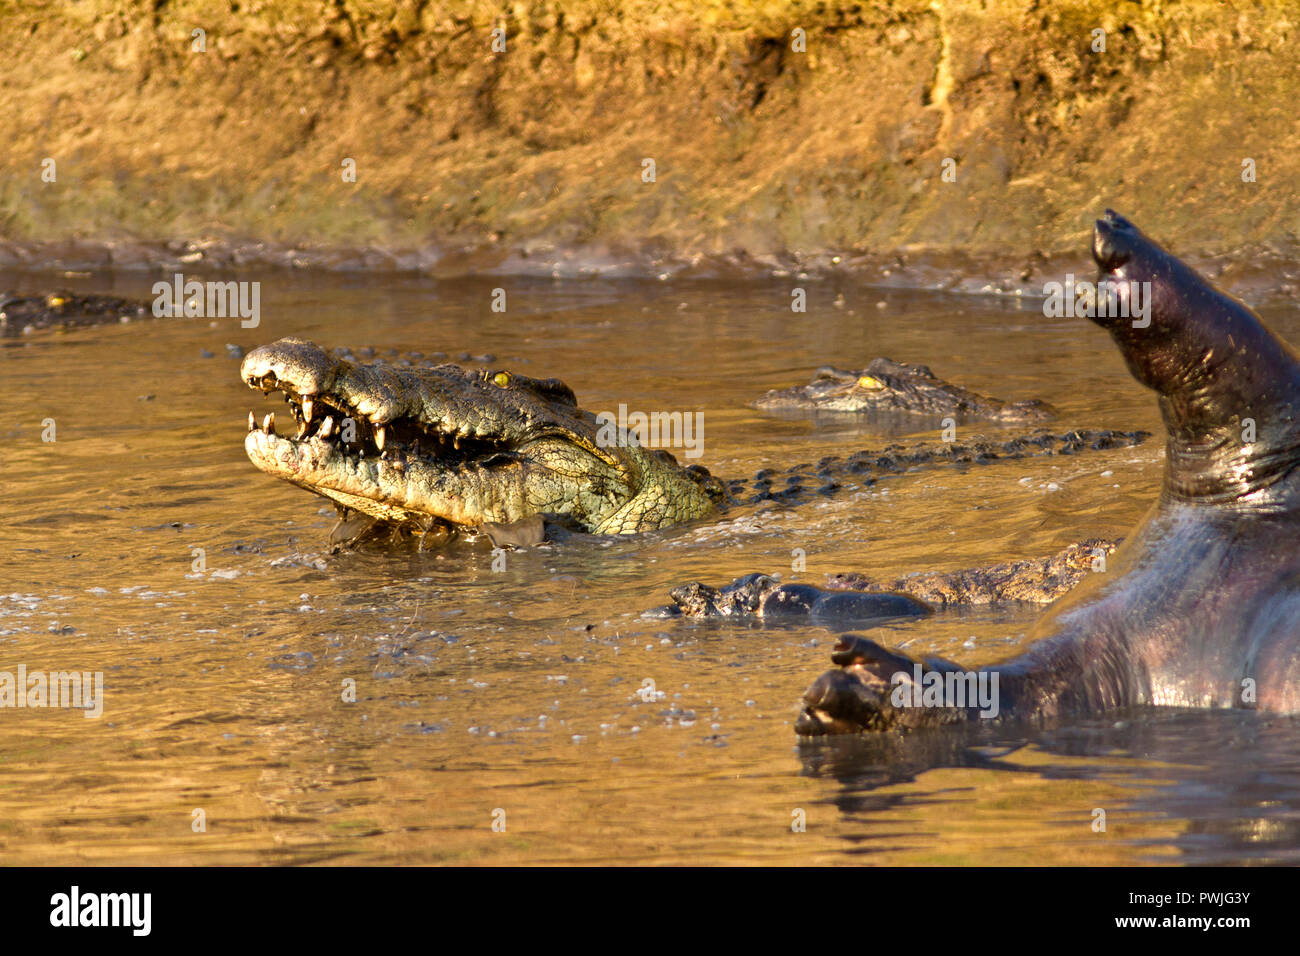 Crocodiles congregate around the carcass of a dead imm hippo and start to gorge by spinning and tearing off huge chunks which they gulp down in one. Stock Photo